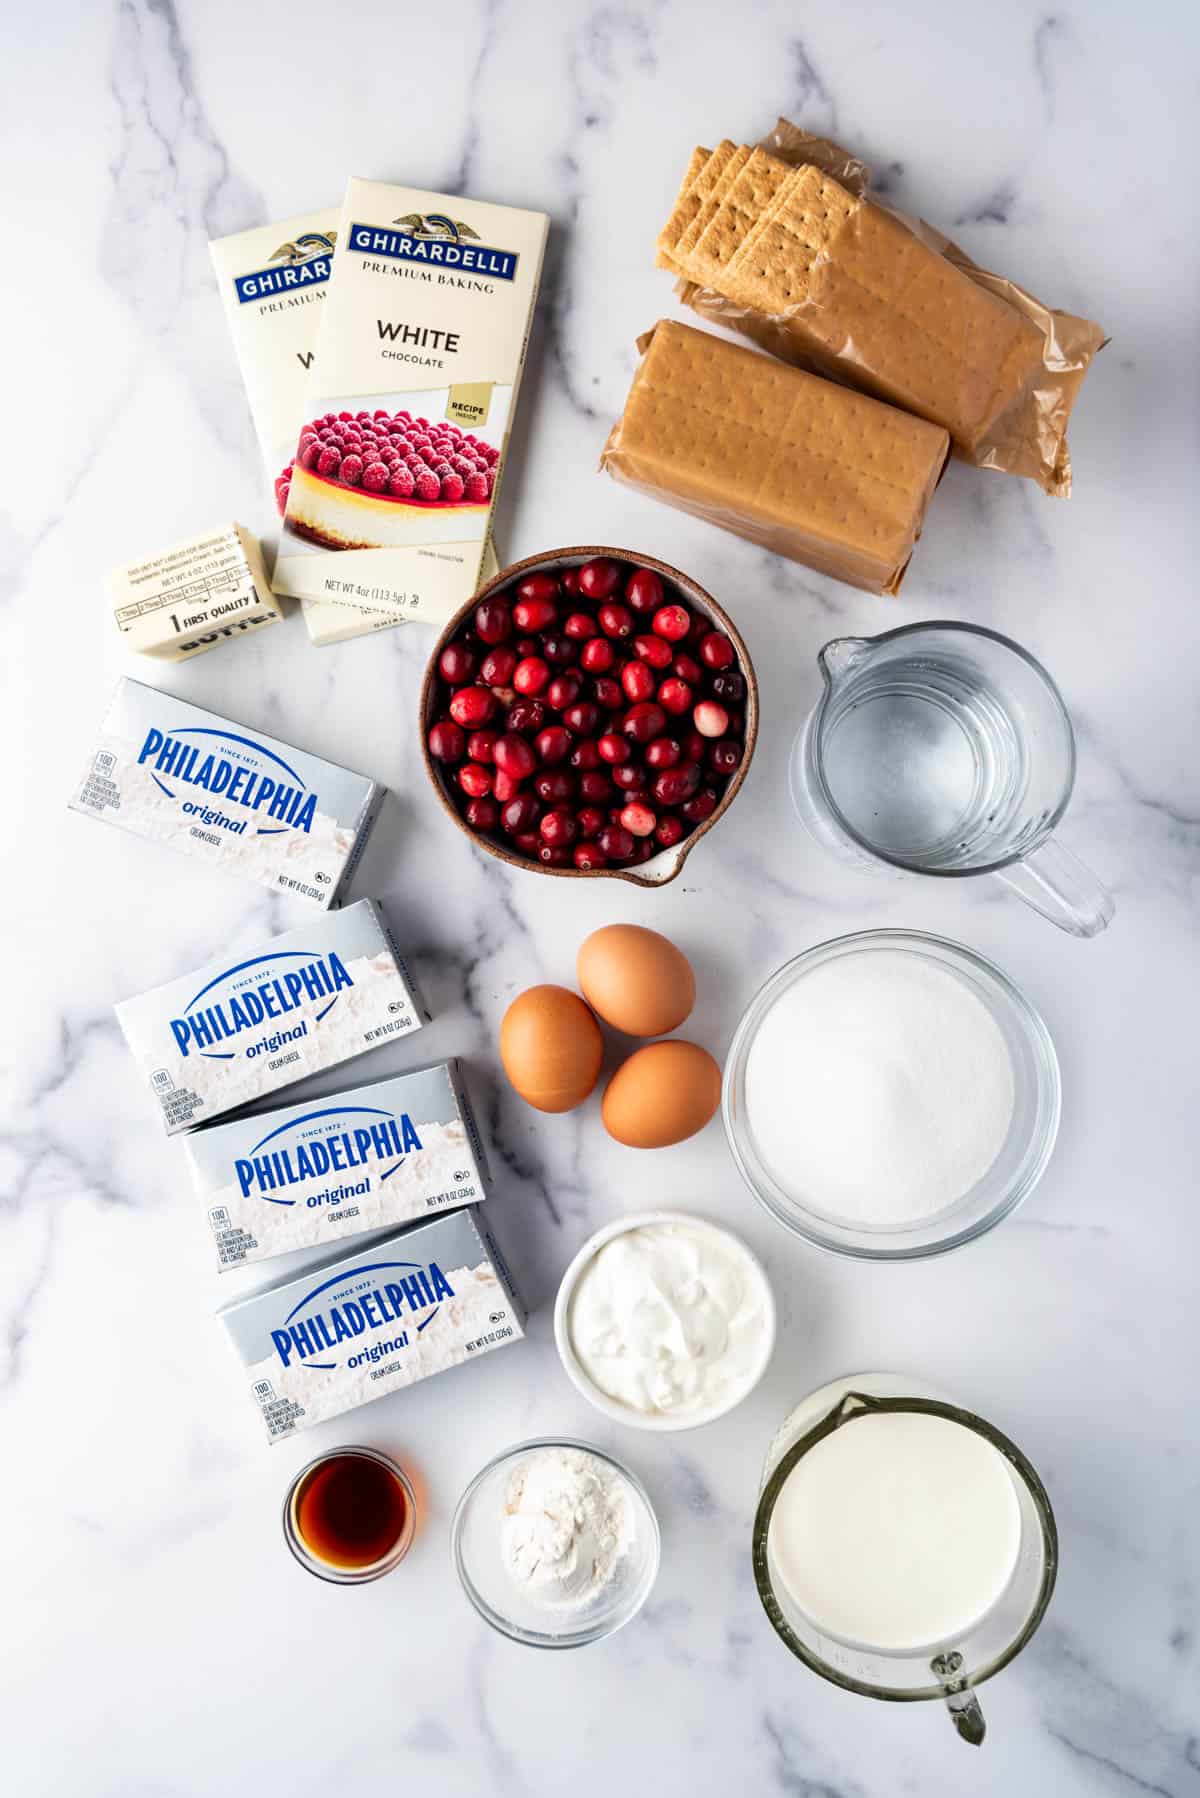 Ingredients for a cranberry cheesecake.